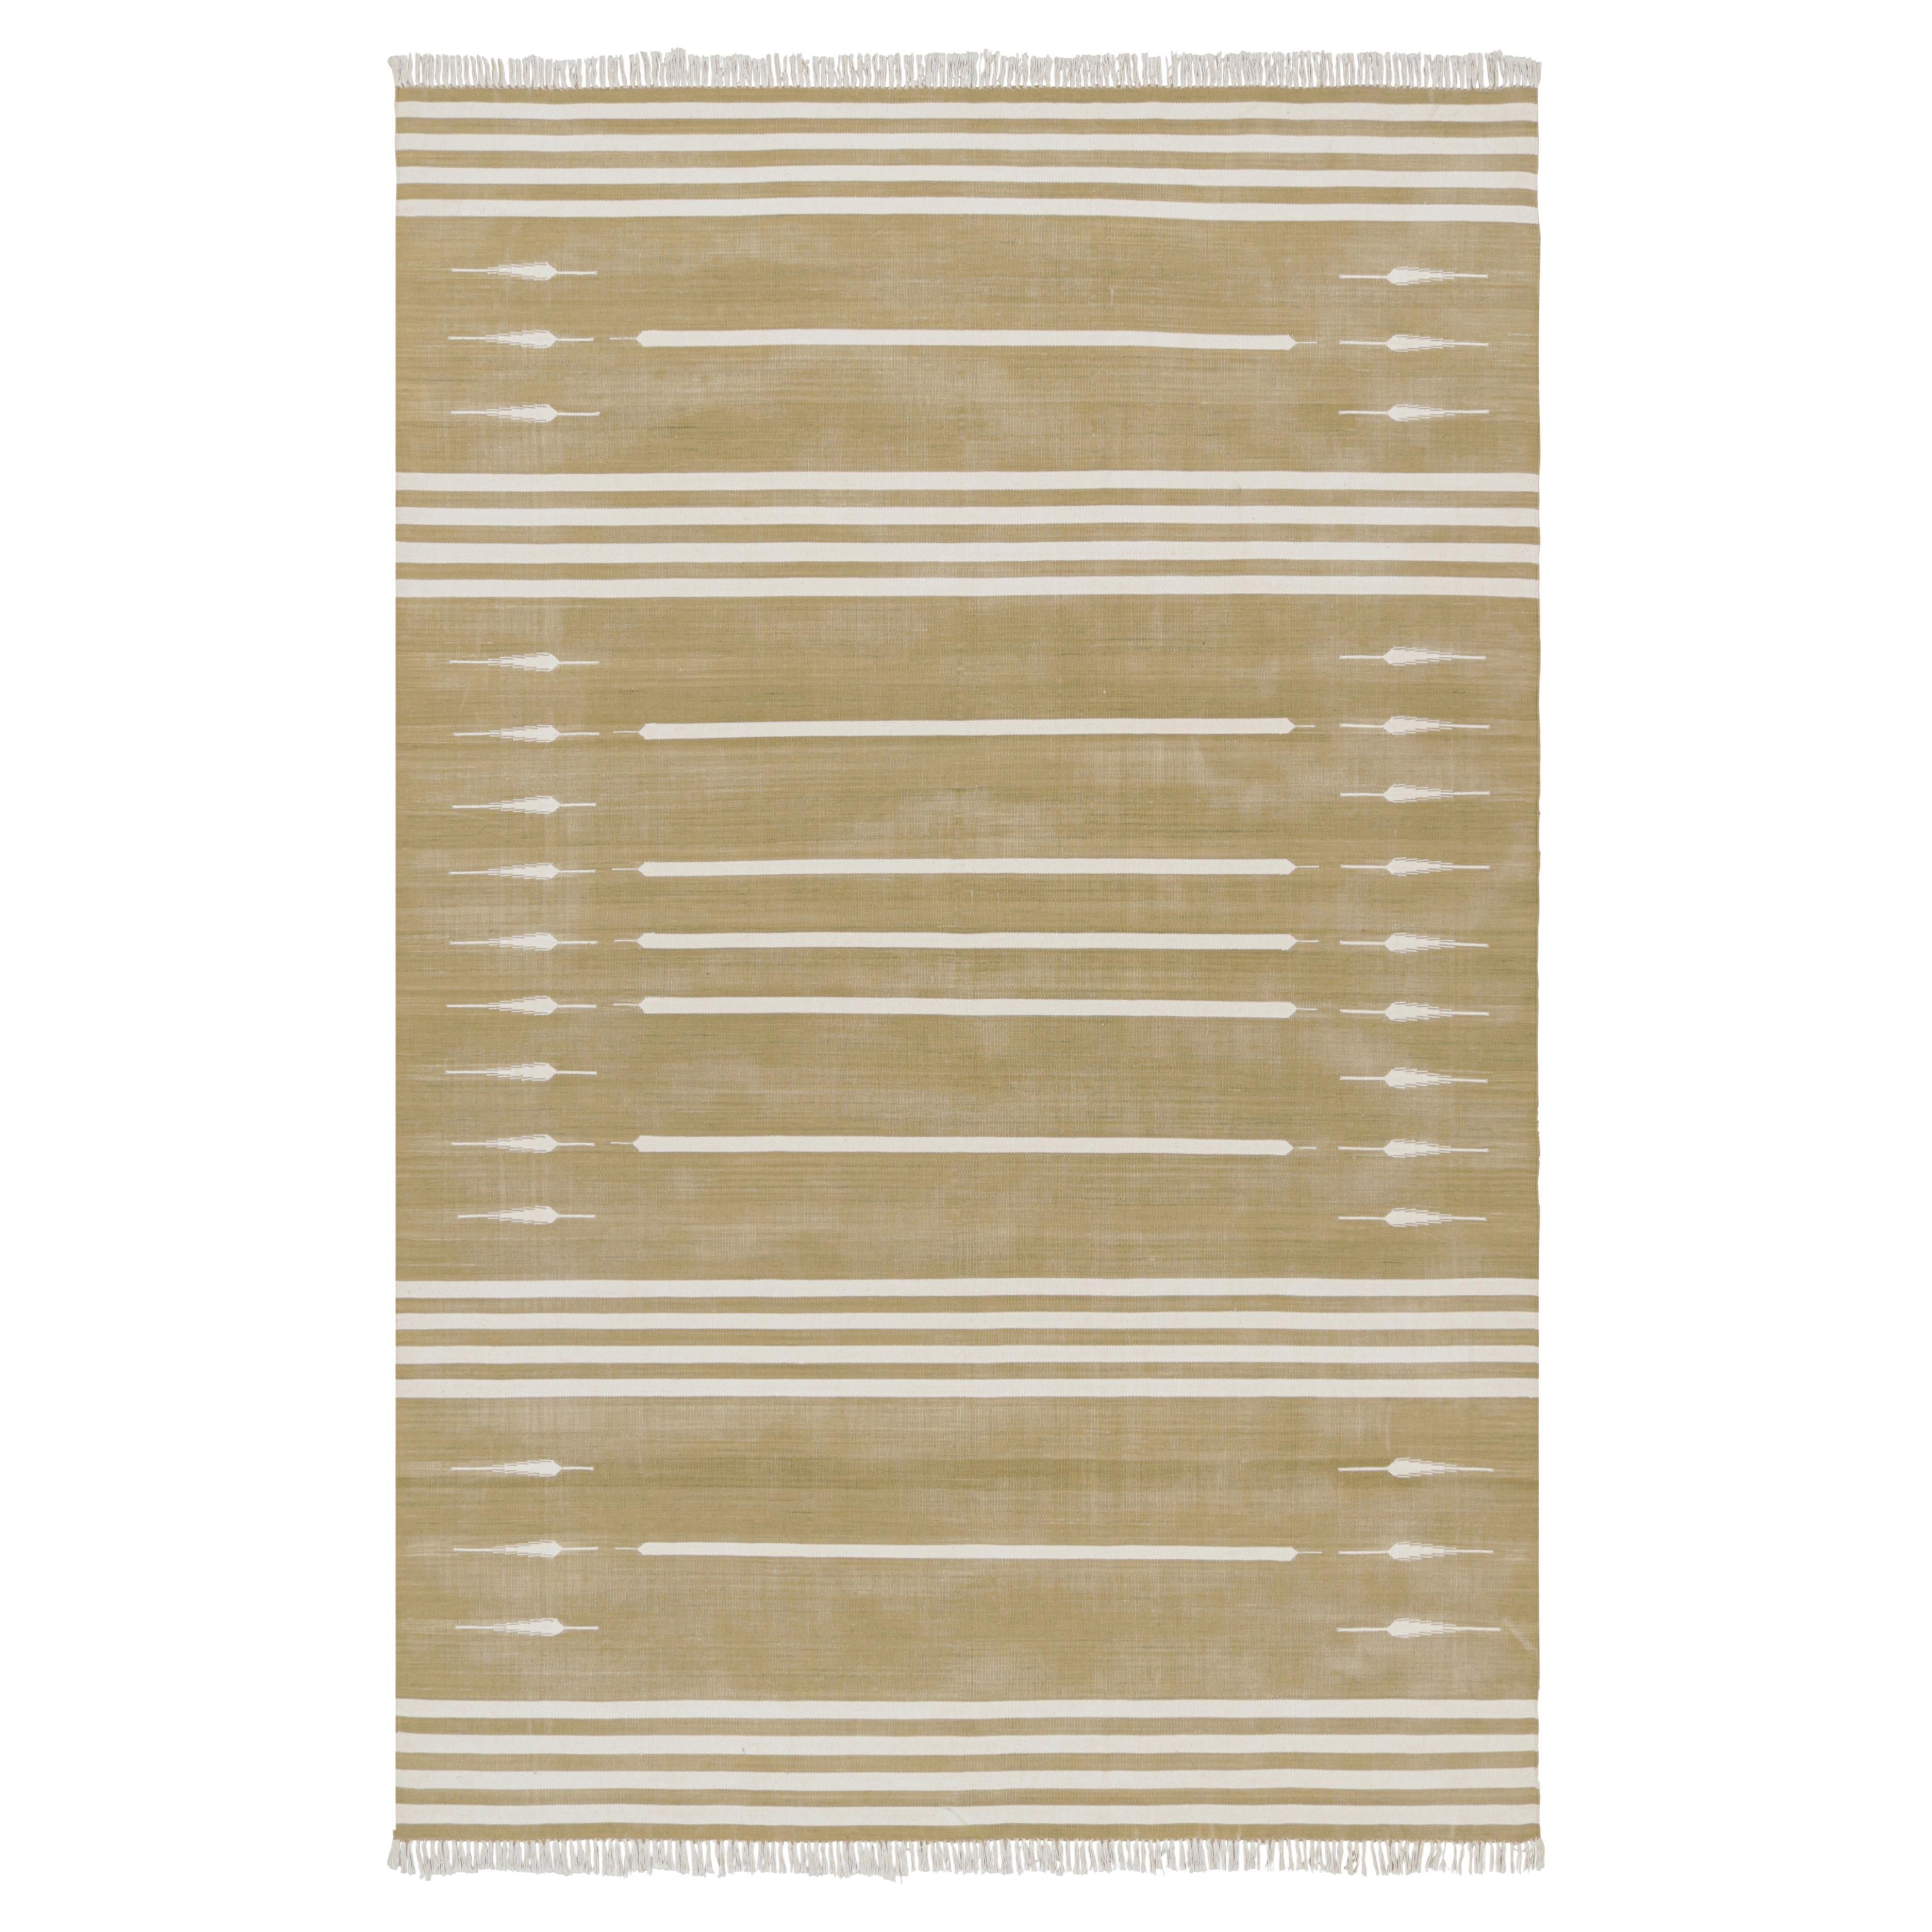 Rug & Kilim's Contemporary Dhurrie Rug in Beige and White Stripes (tapis contemporain Dhurrie à rayures beiges et blanches)